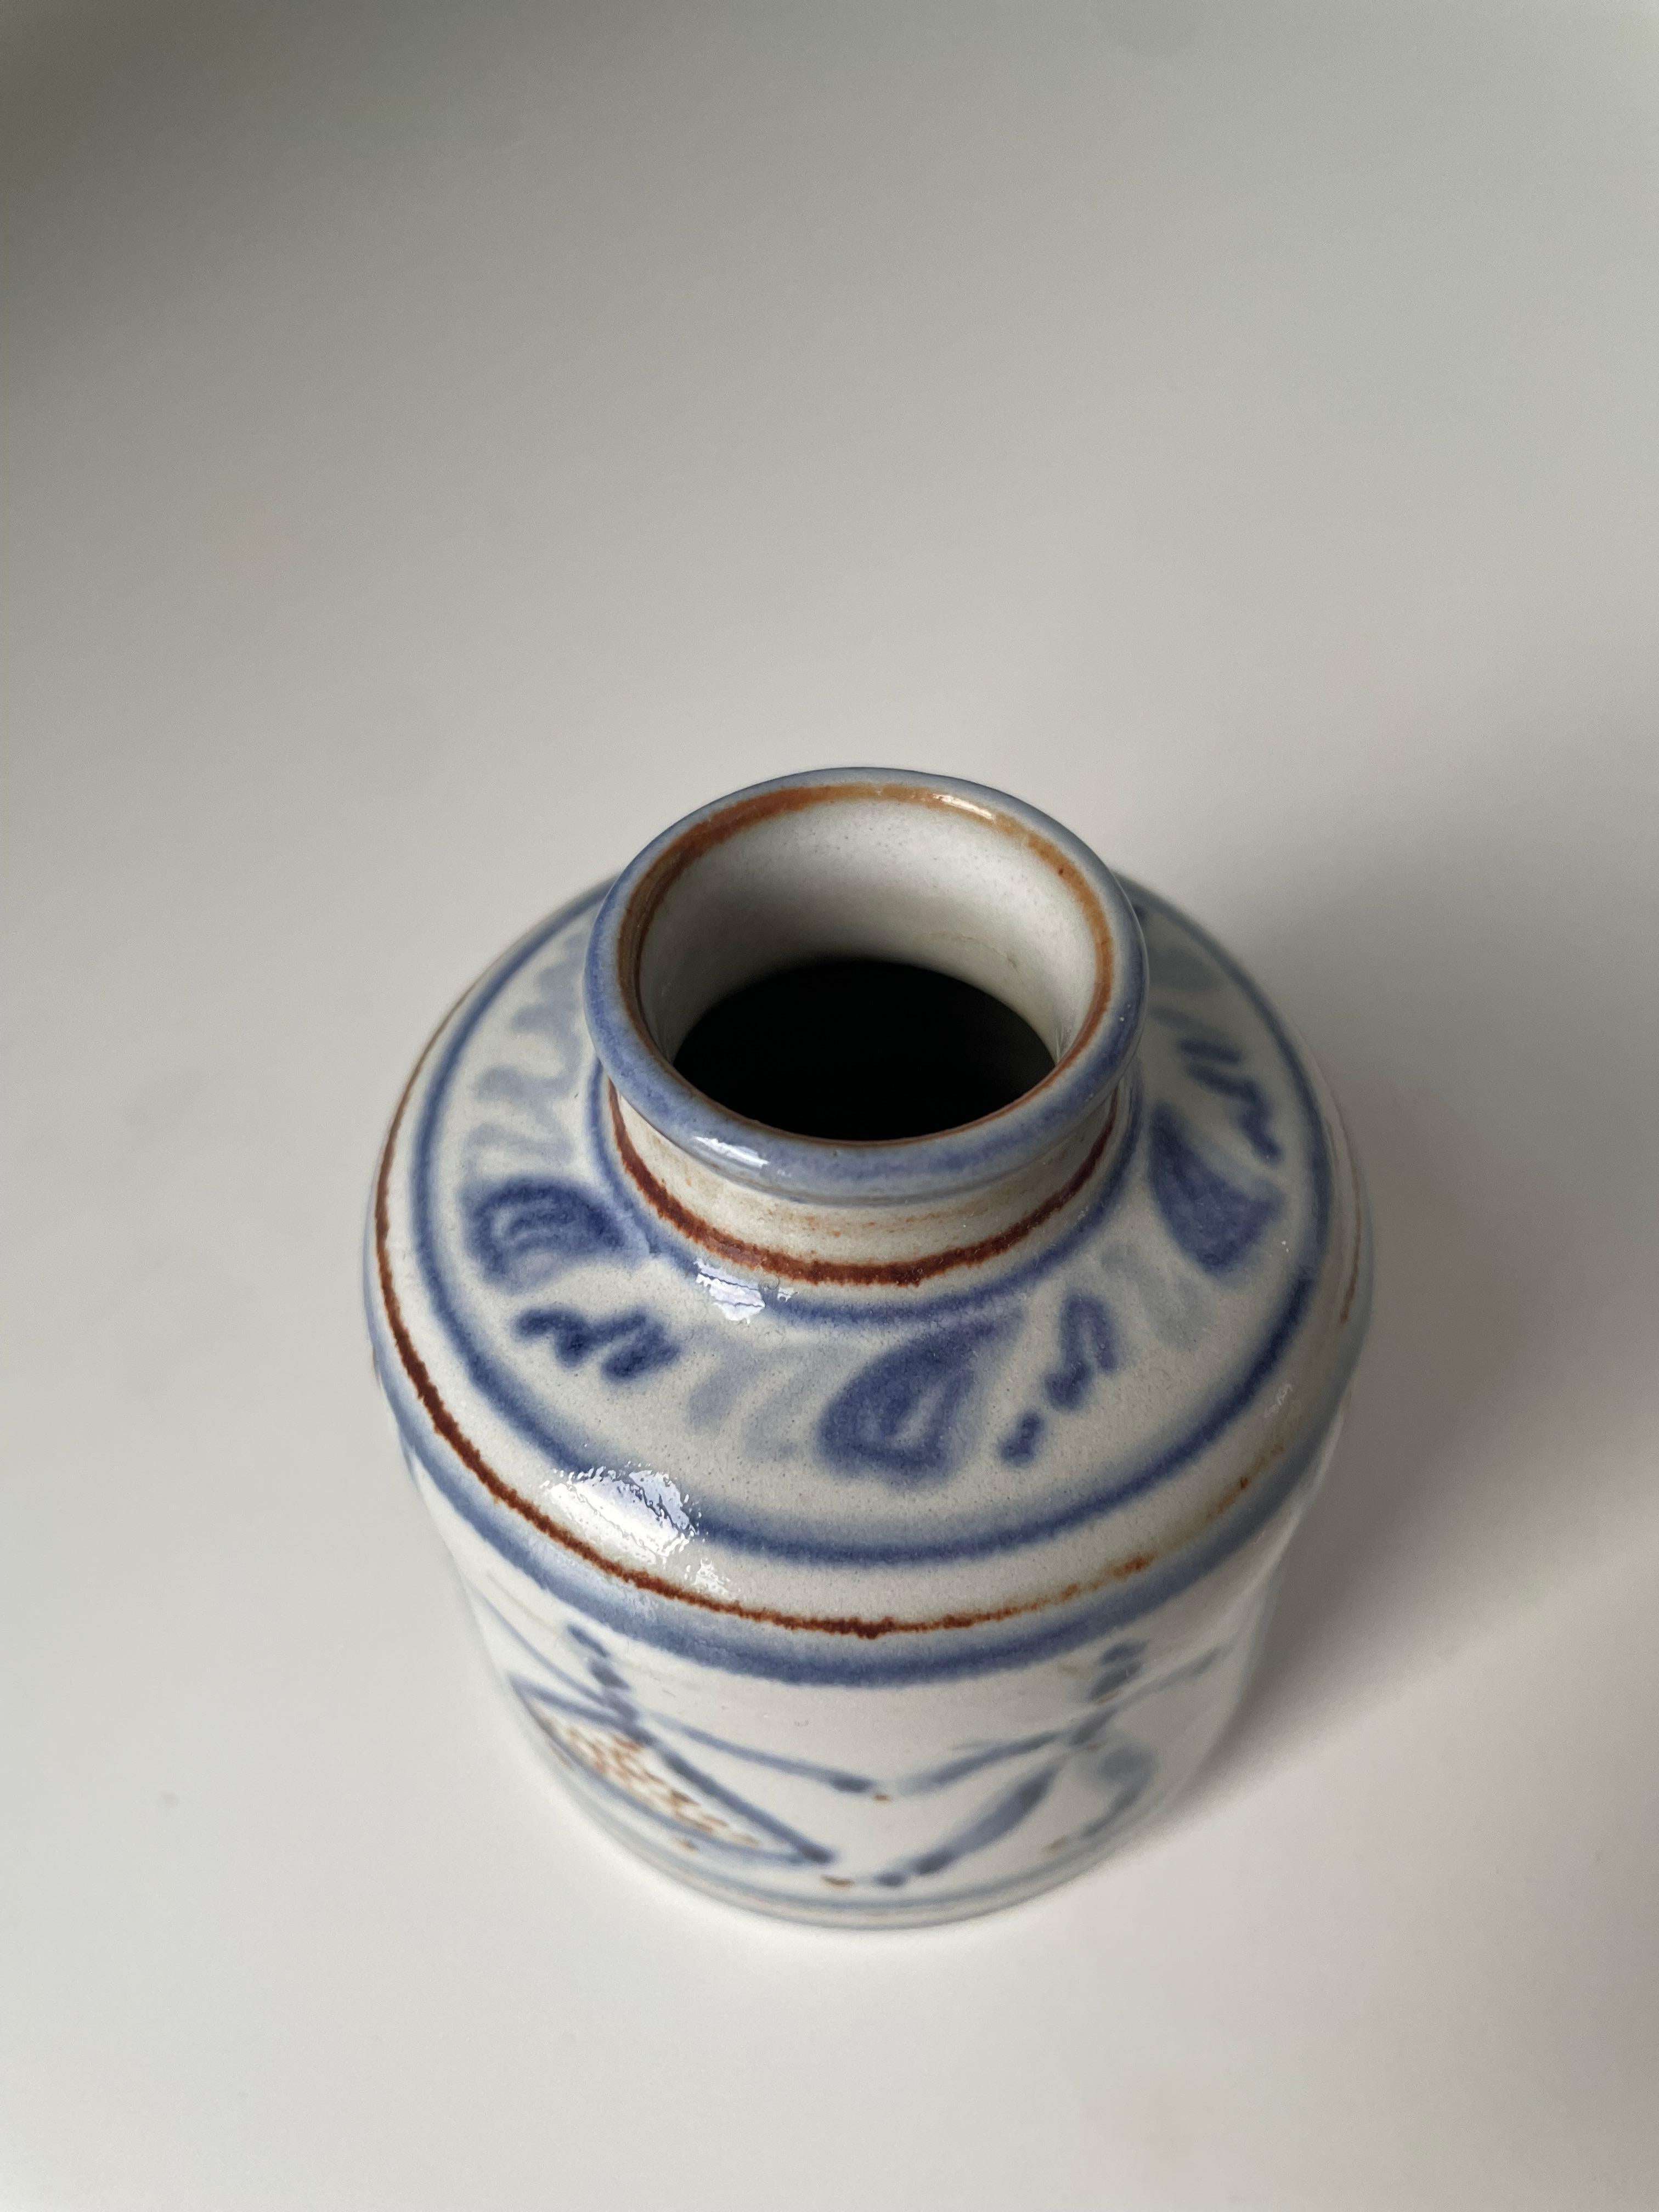 L. Hjorth Hand-Decorated Blue White Vase, 1950s For Sale 2